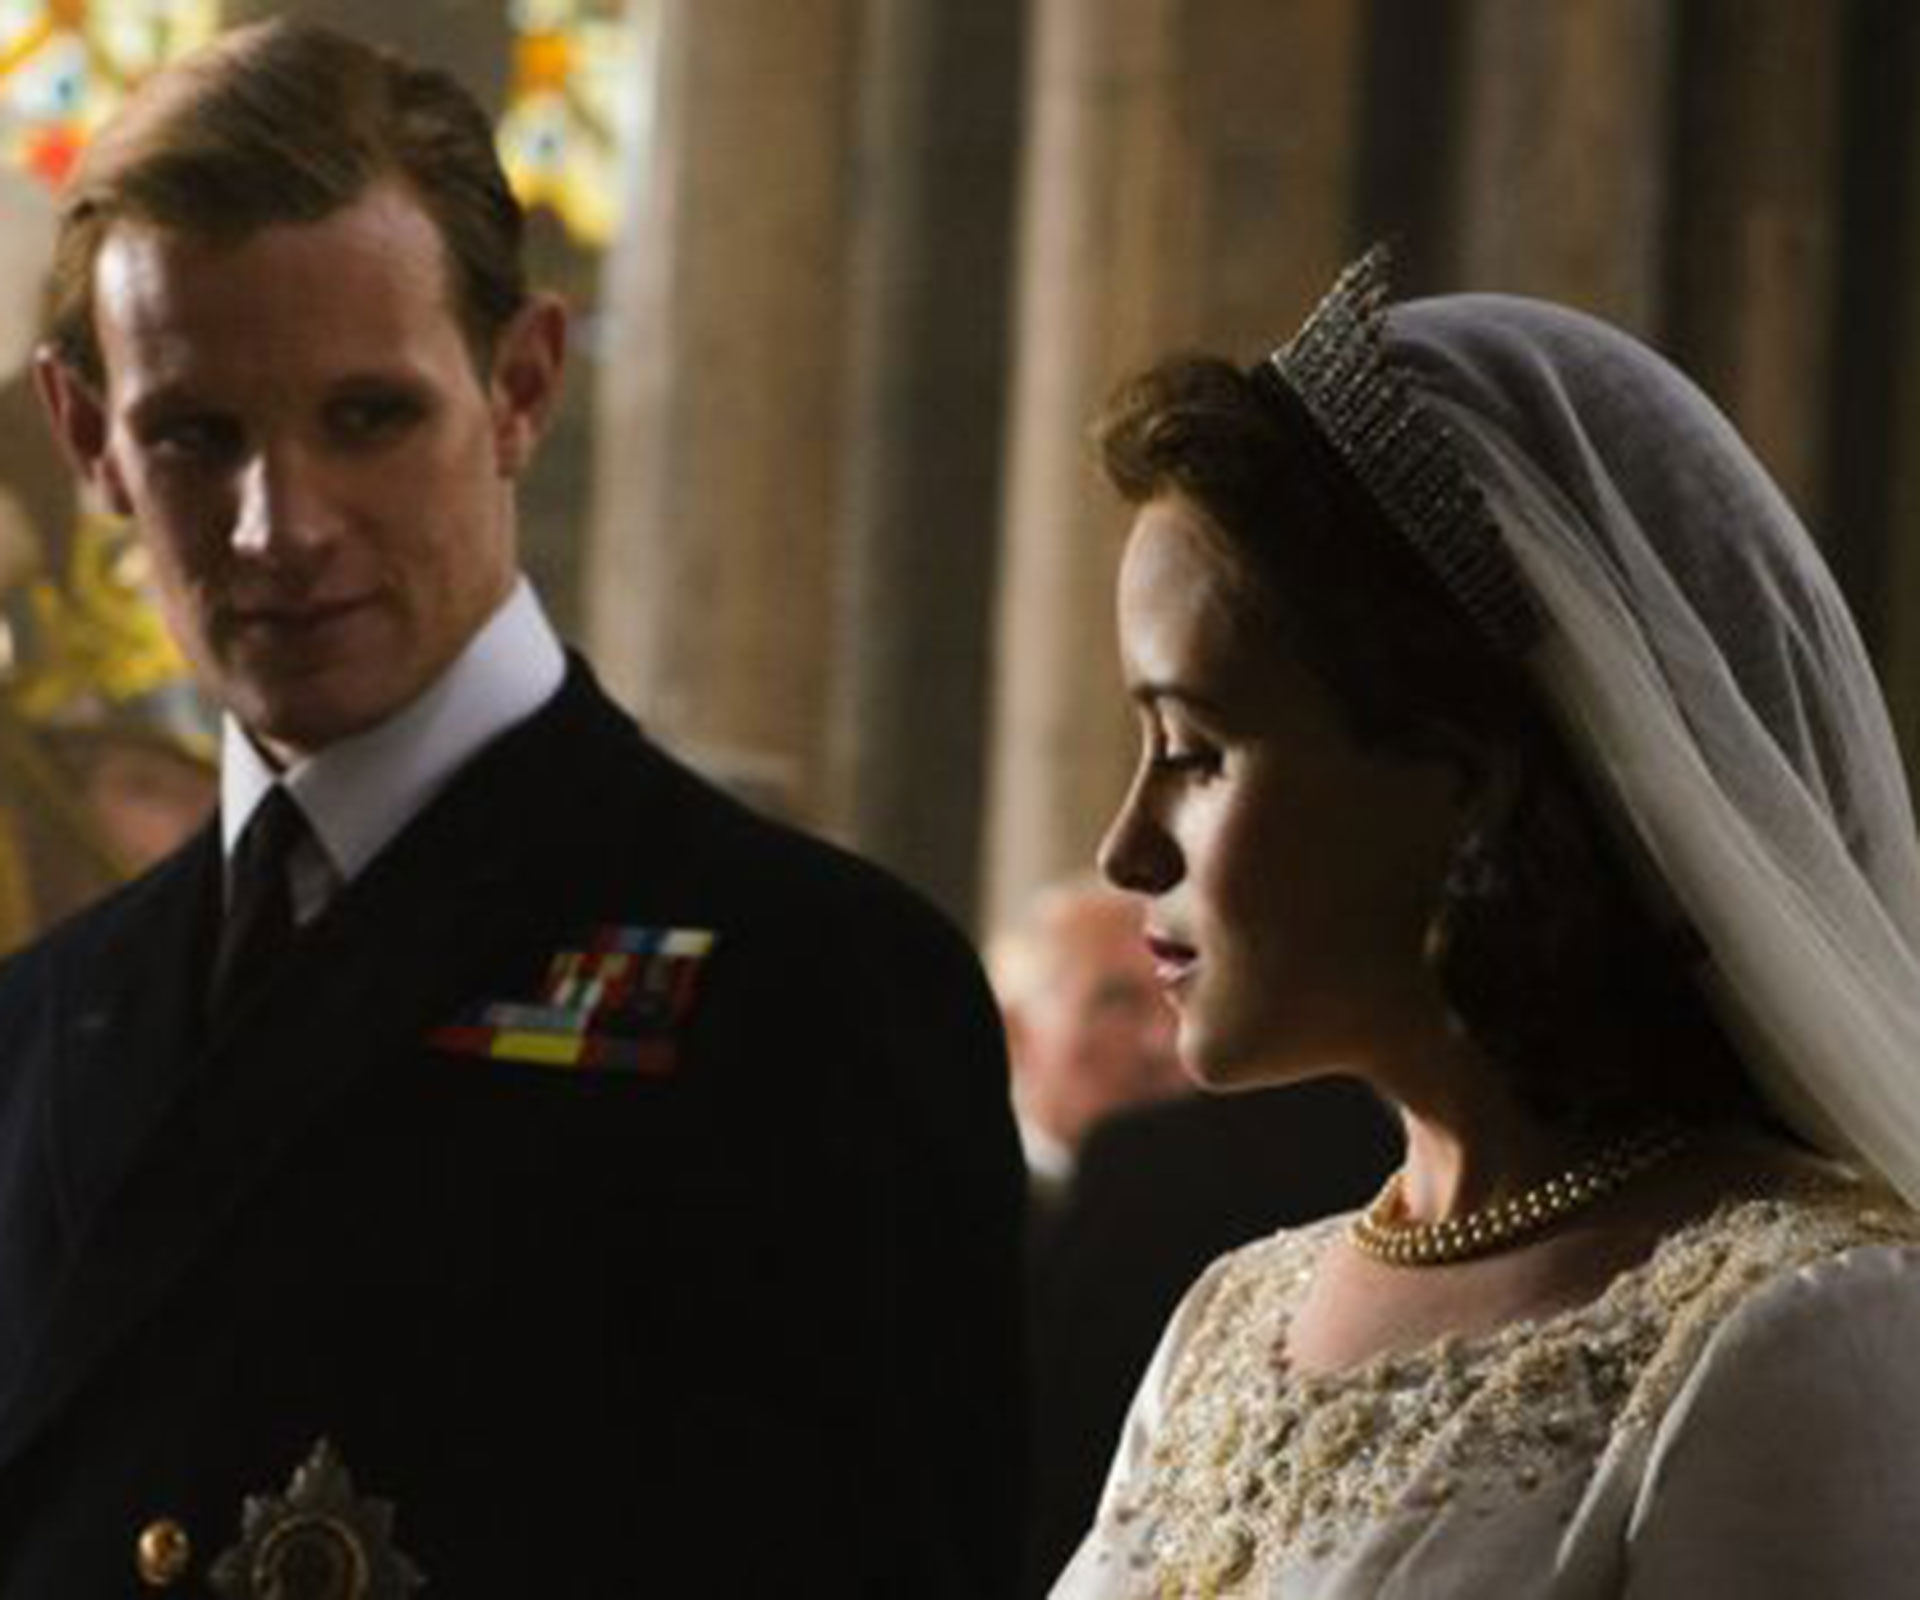 WATCH: The first trailer for Netflix’s highly-anticipated Queen Elizabeth series